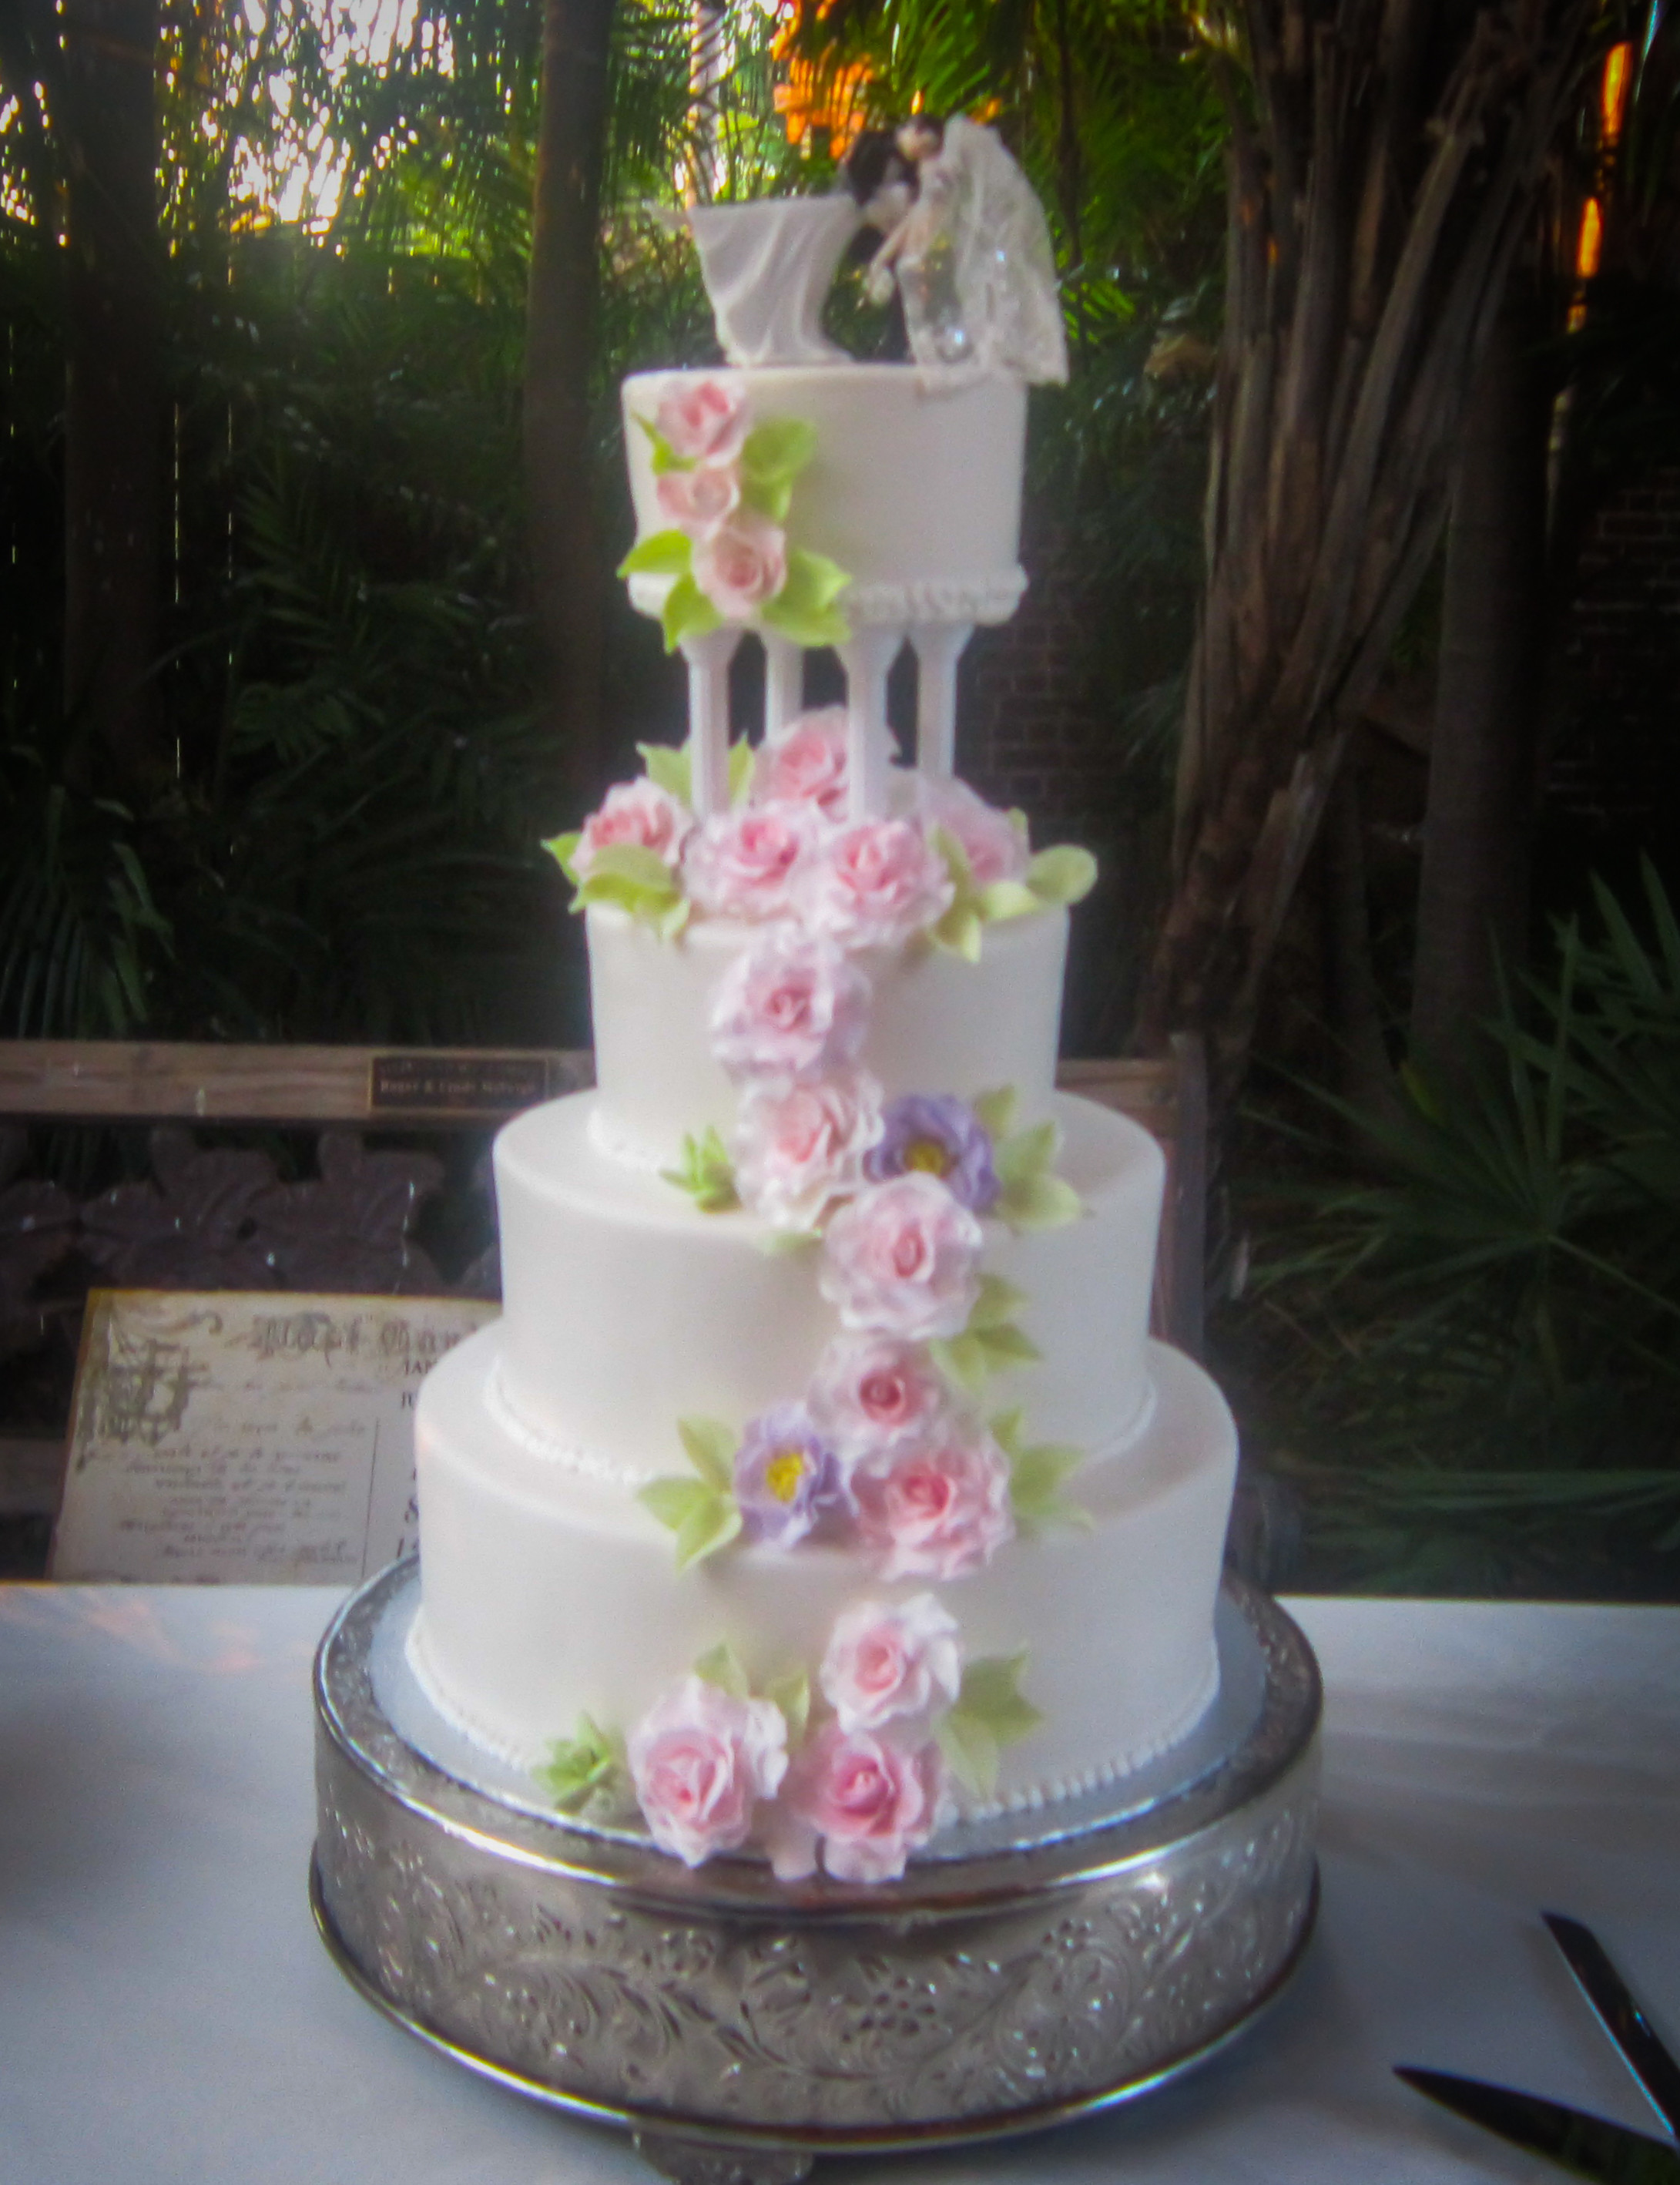 Www Wedding Cakes
 Amazing Cakes and Creations – Key West Cakes and Specialty